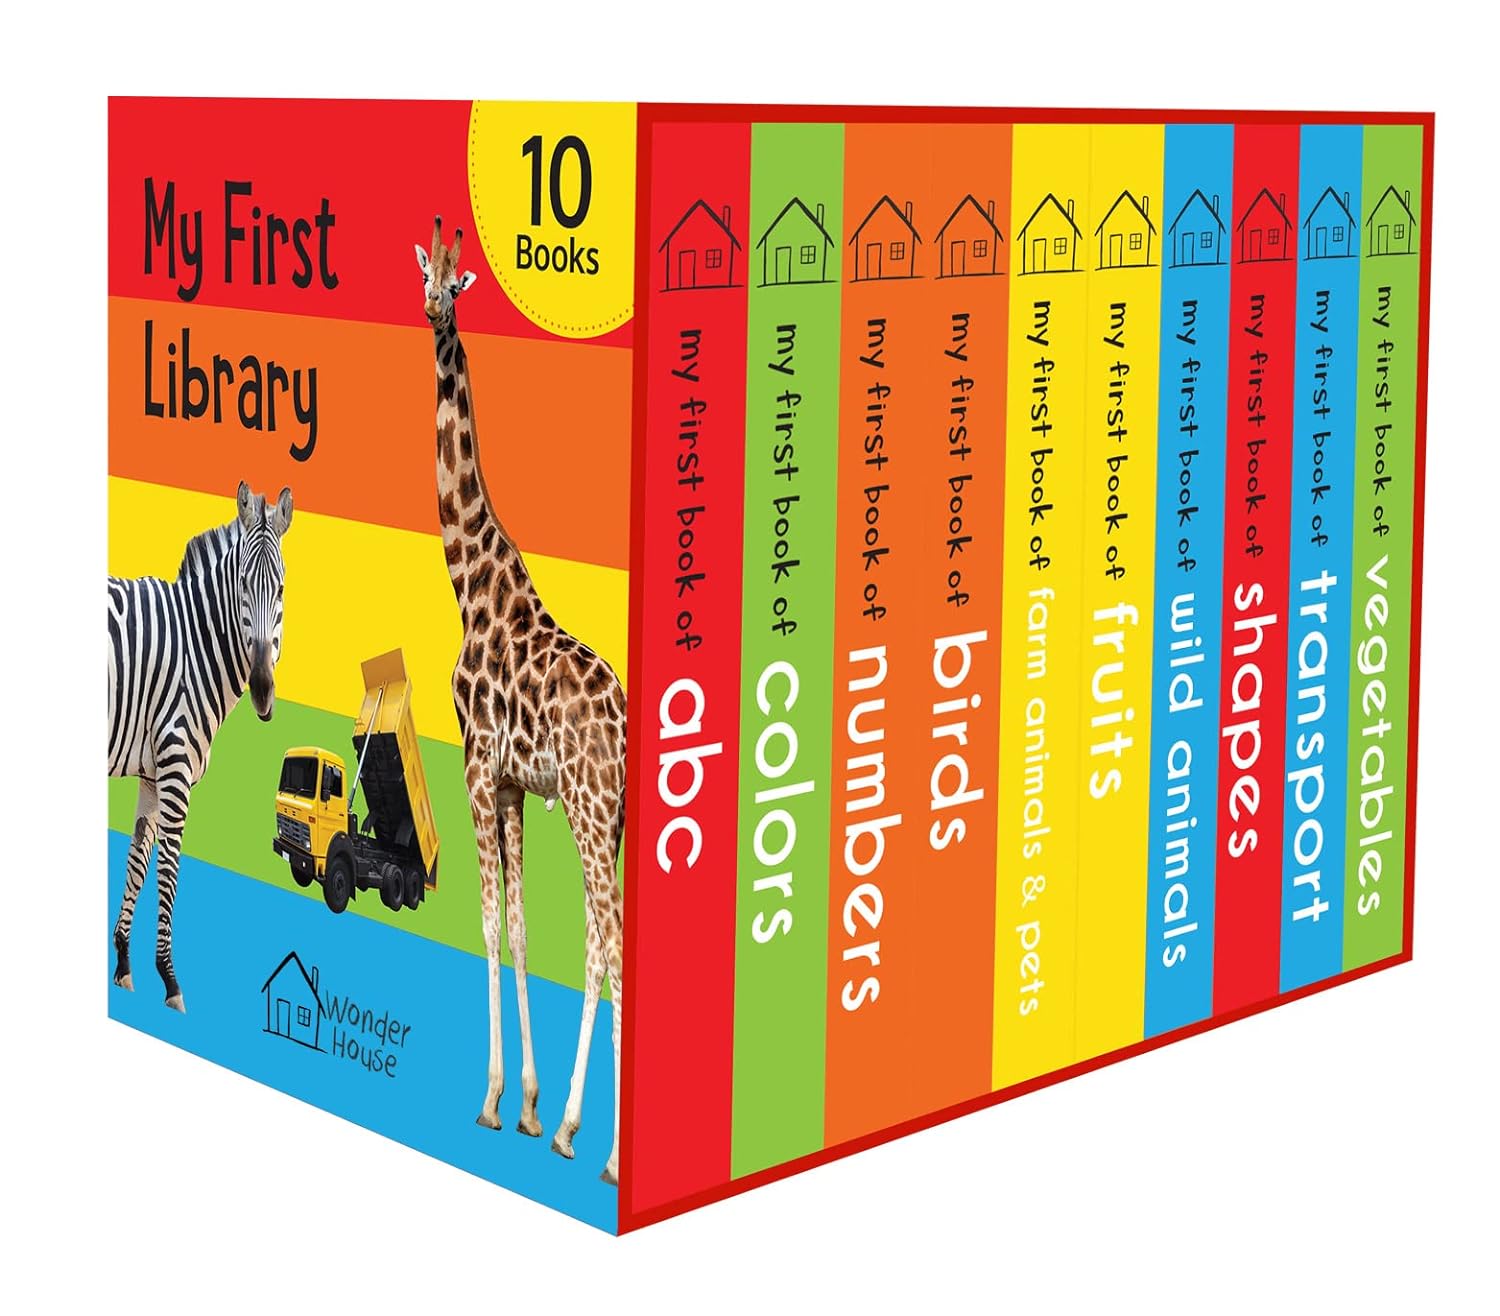 My First Library by Wonder House Books